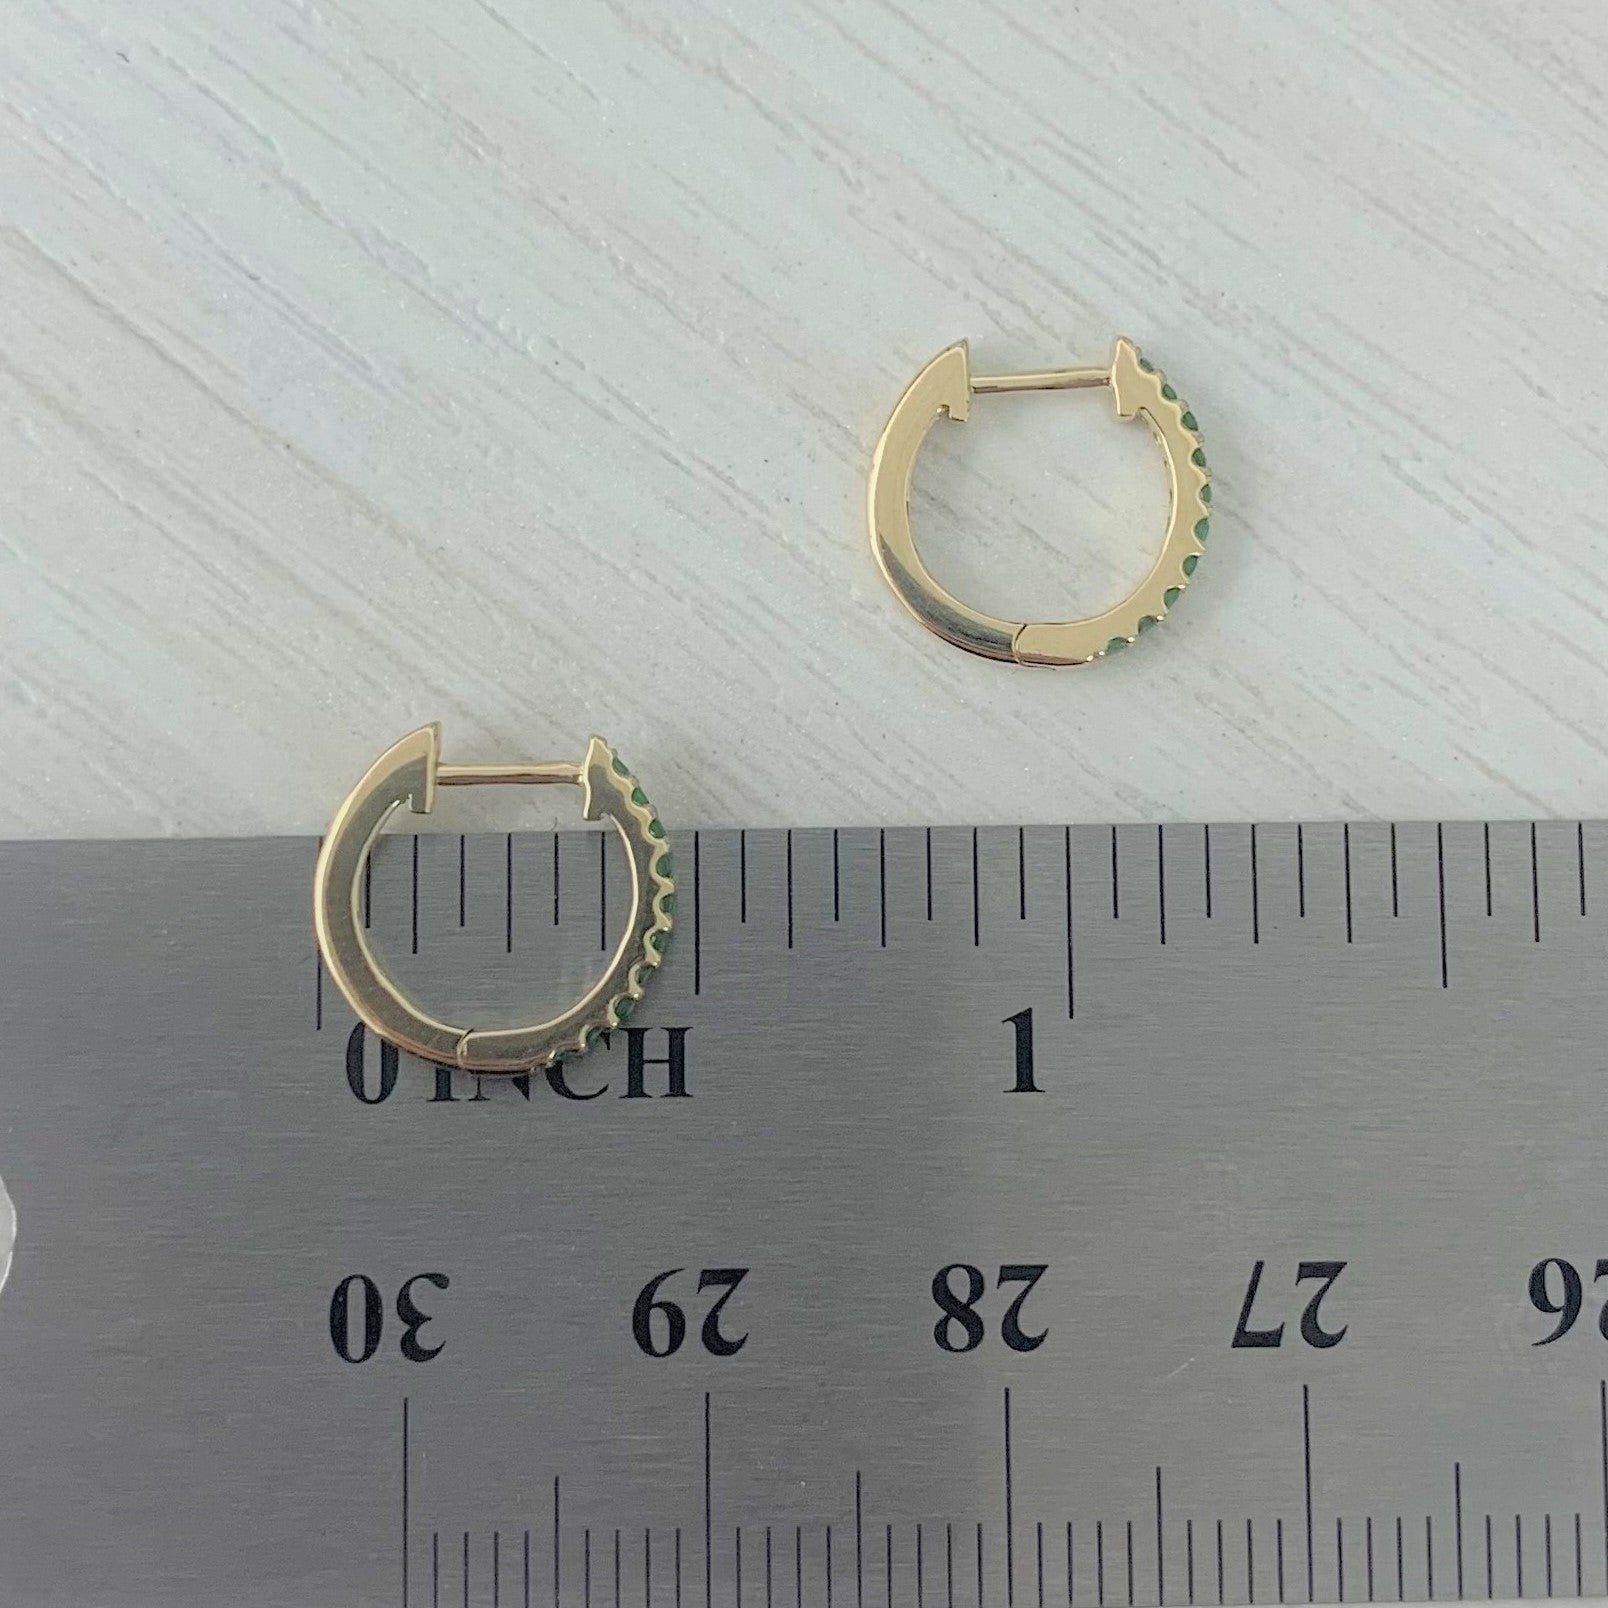 14kt white gold/14kt yellow gold/14kt rose gold/measurements